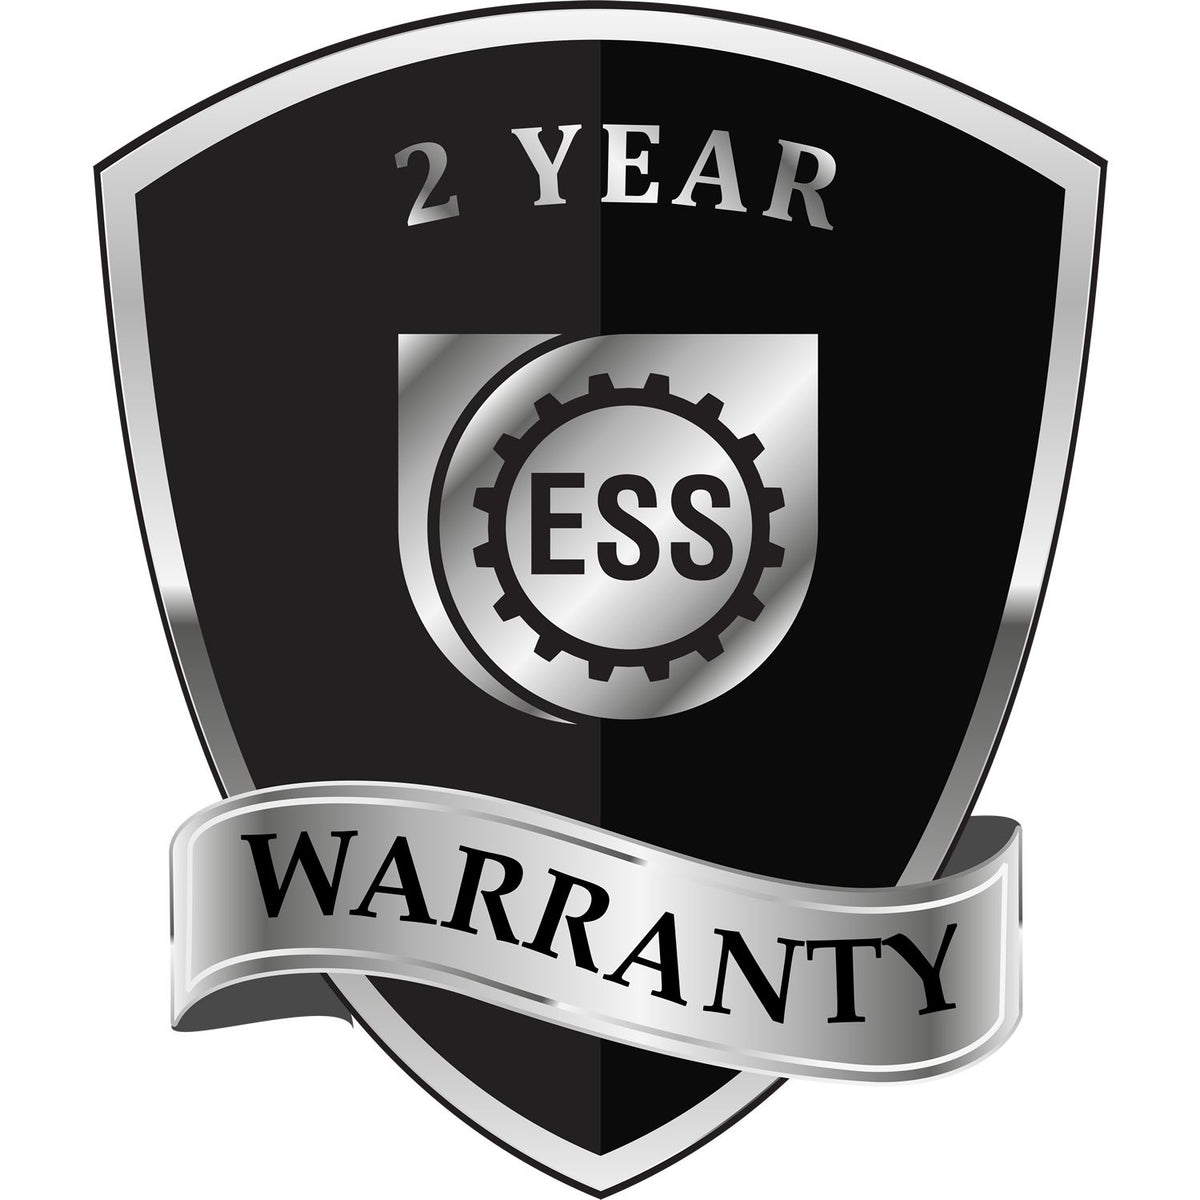 A badge or emblem showing a warranty icon for the Heavy Duty Cast Iron Massachusetts Land Surveyor Seal Embosser